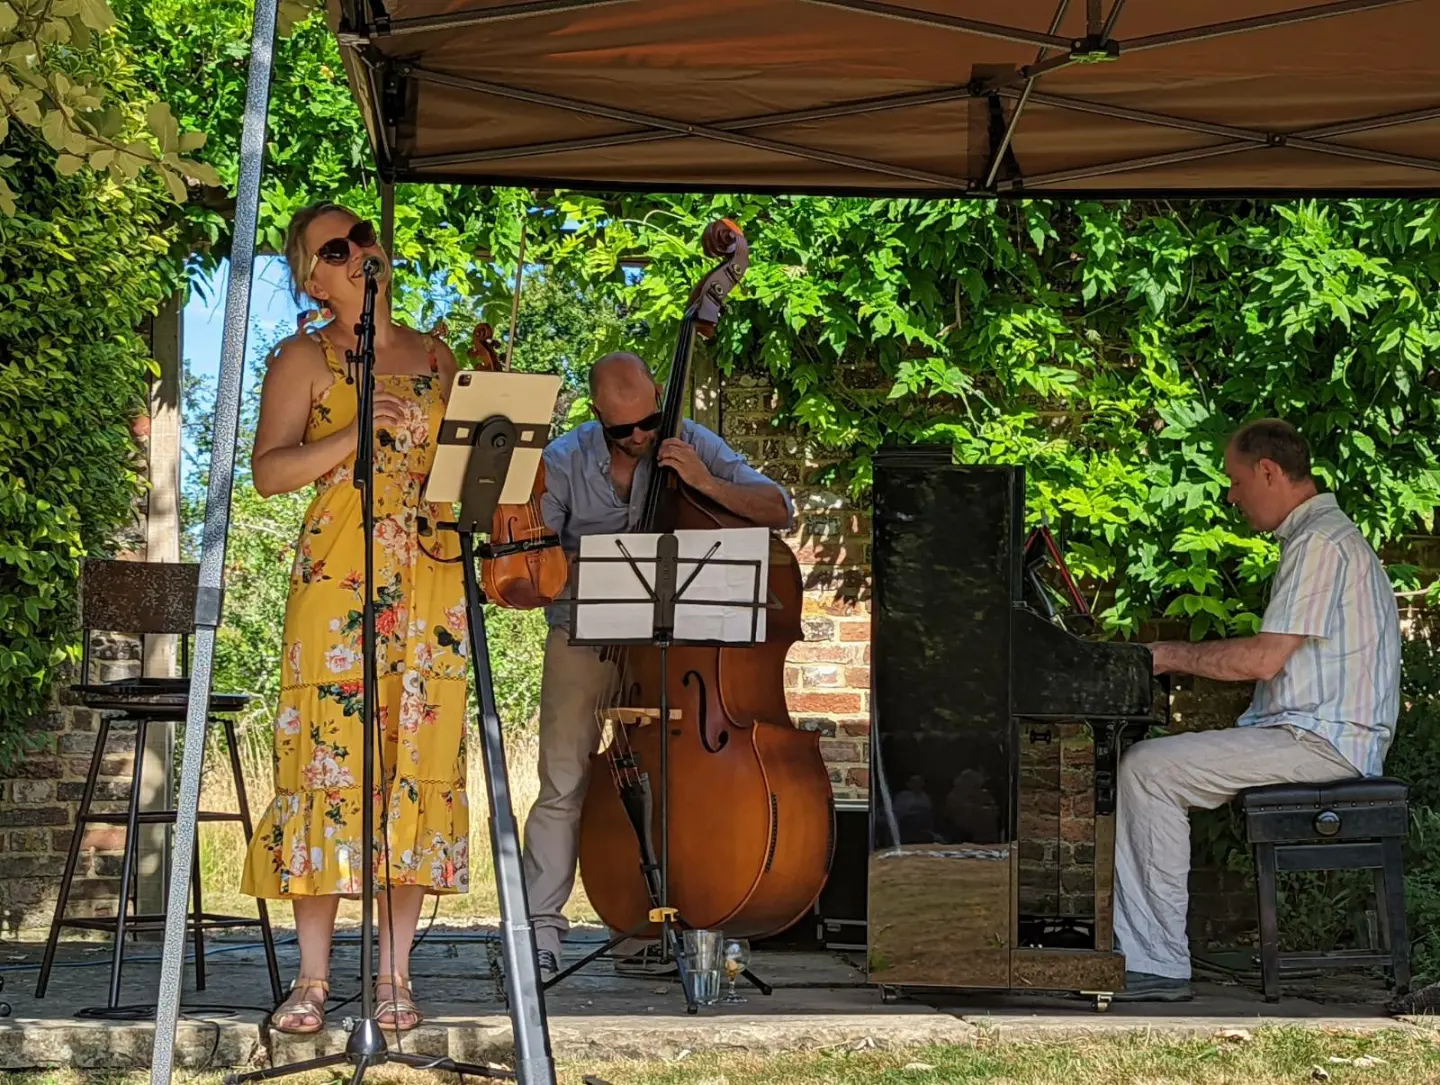 Jazz trio comprising of vocalist, double bass and piano under a gazebo.